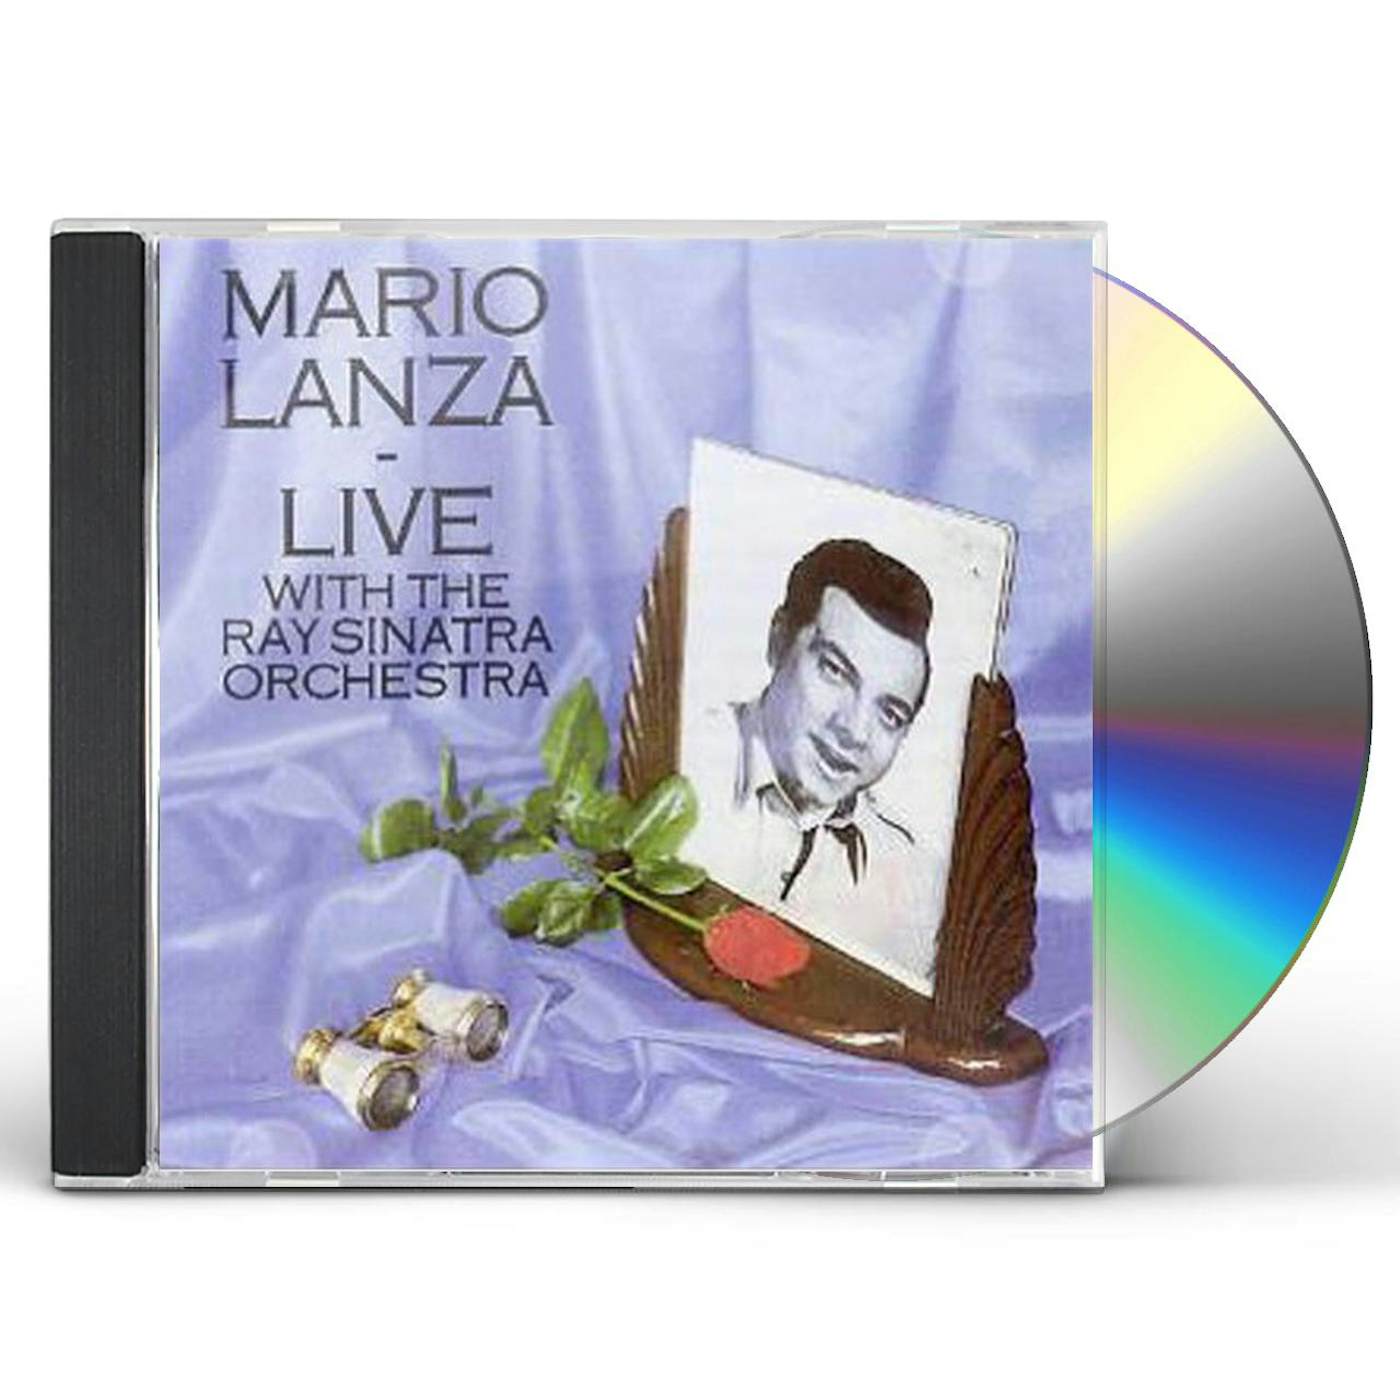 Mario Lanza LIVE WITH THE RAY SINATRA ORCHESTRA CD